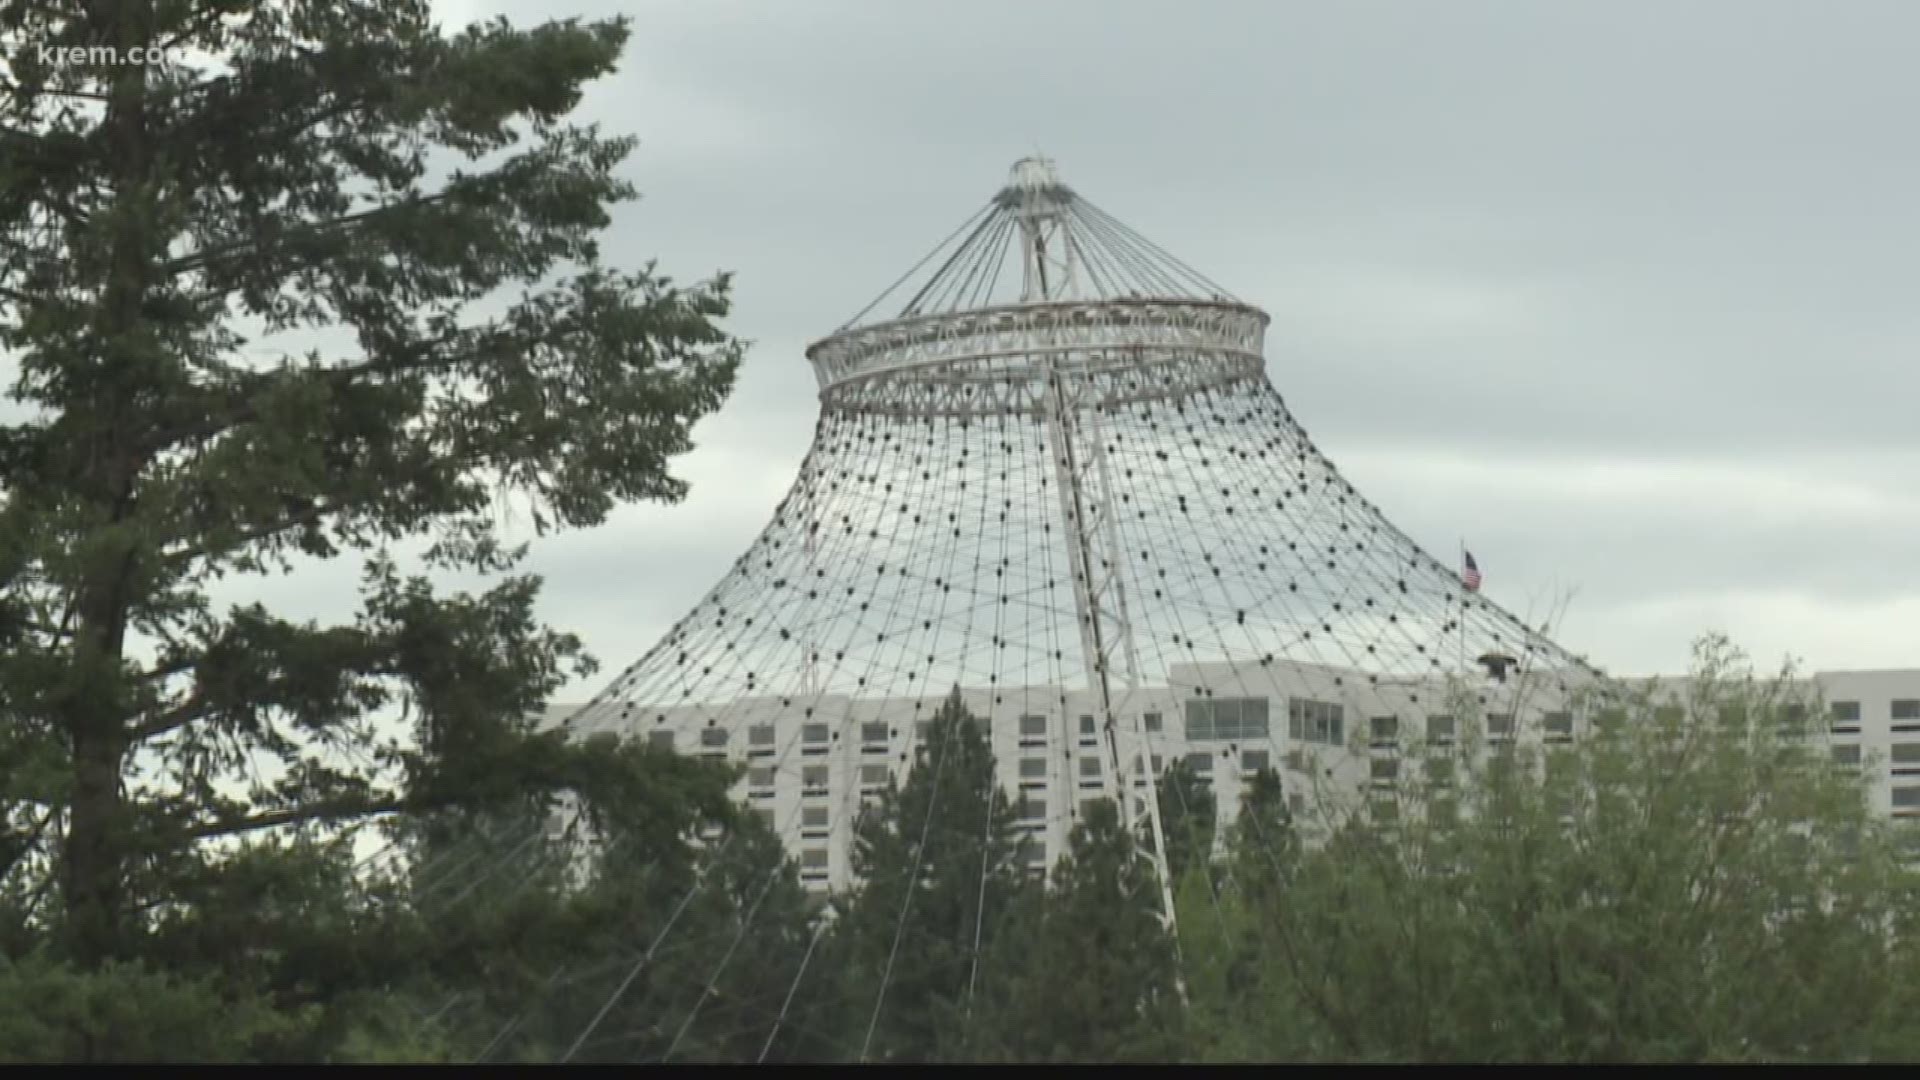 According to Washington Department of Fish and Wildlife, a pair of osprey nested at the top of Spokane's U.S. Pavilion in Riverfront Park.